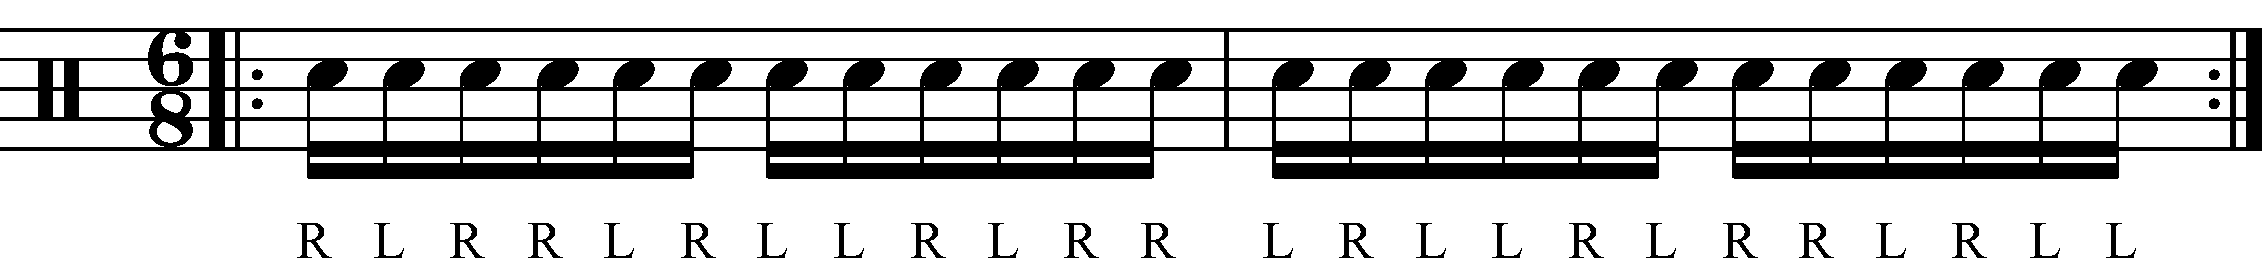 A Paradiddle in 6/8 with standard sticking